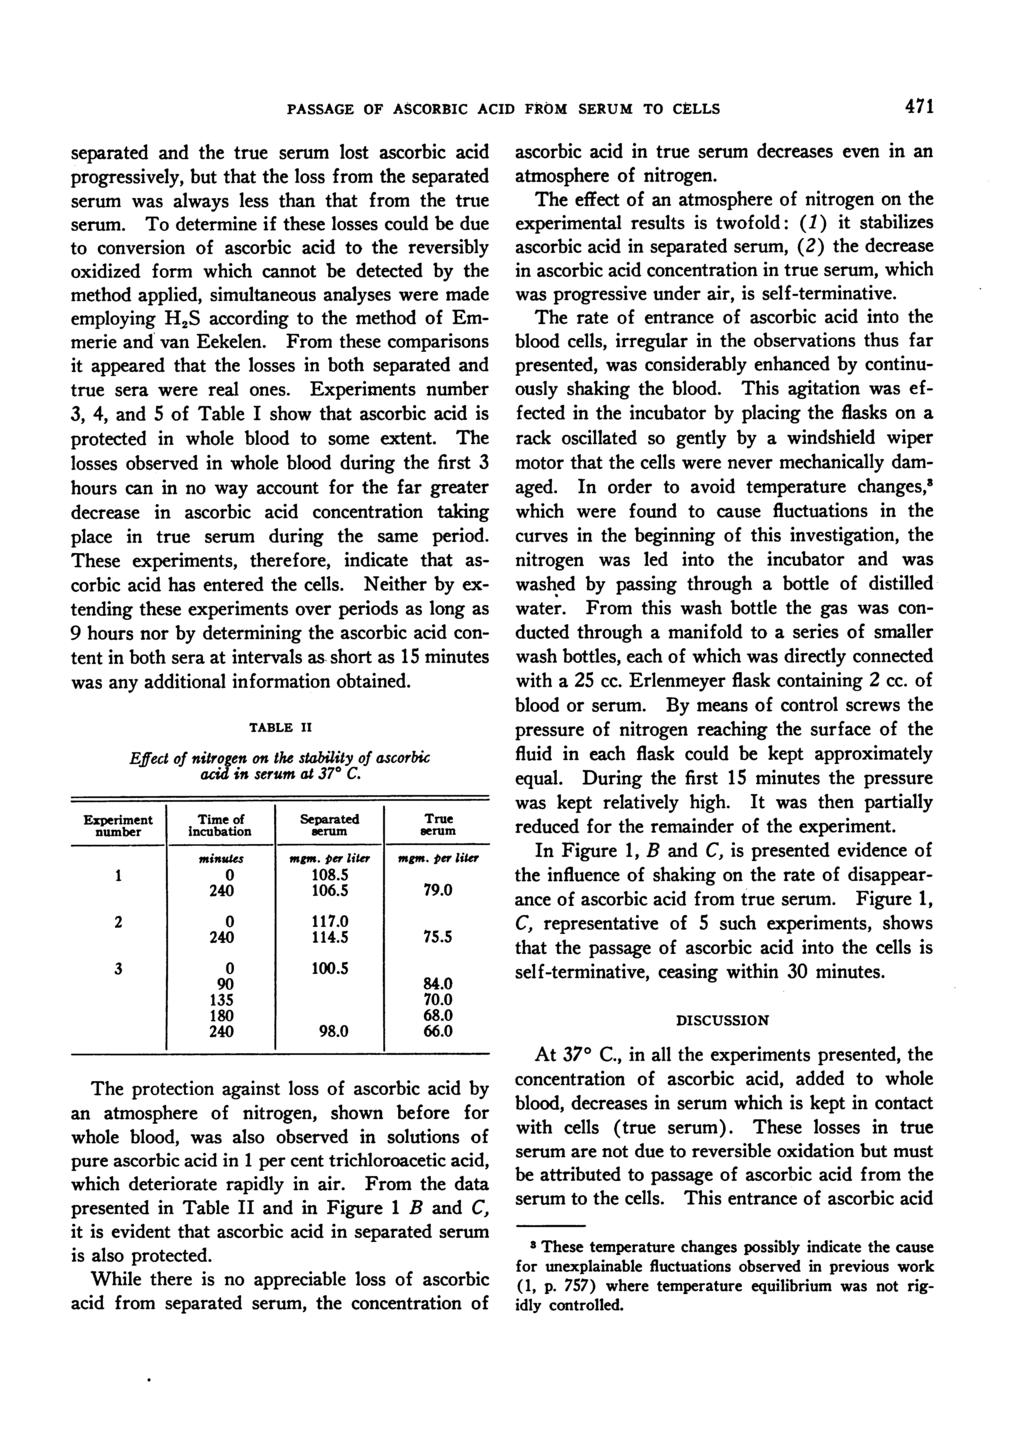 PASSAGE OF ASCORBIC ACID FROM SERUM TO CELLS separated and the true serum lost ascorbic acid progressively, but that the loss from the separated serum was always less than that from the tnre serum.